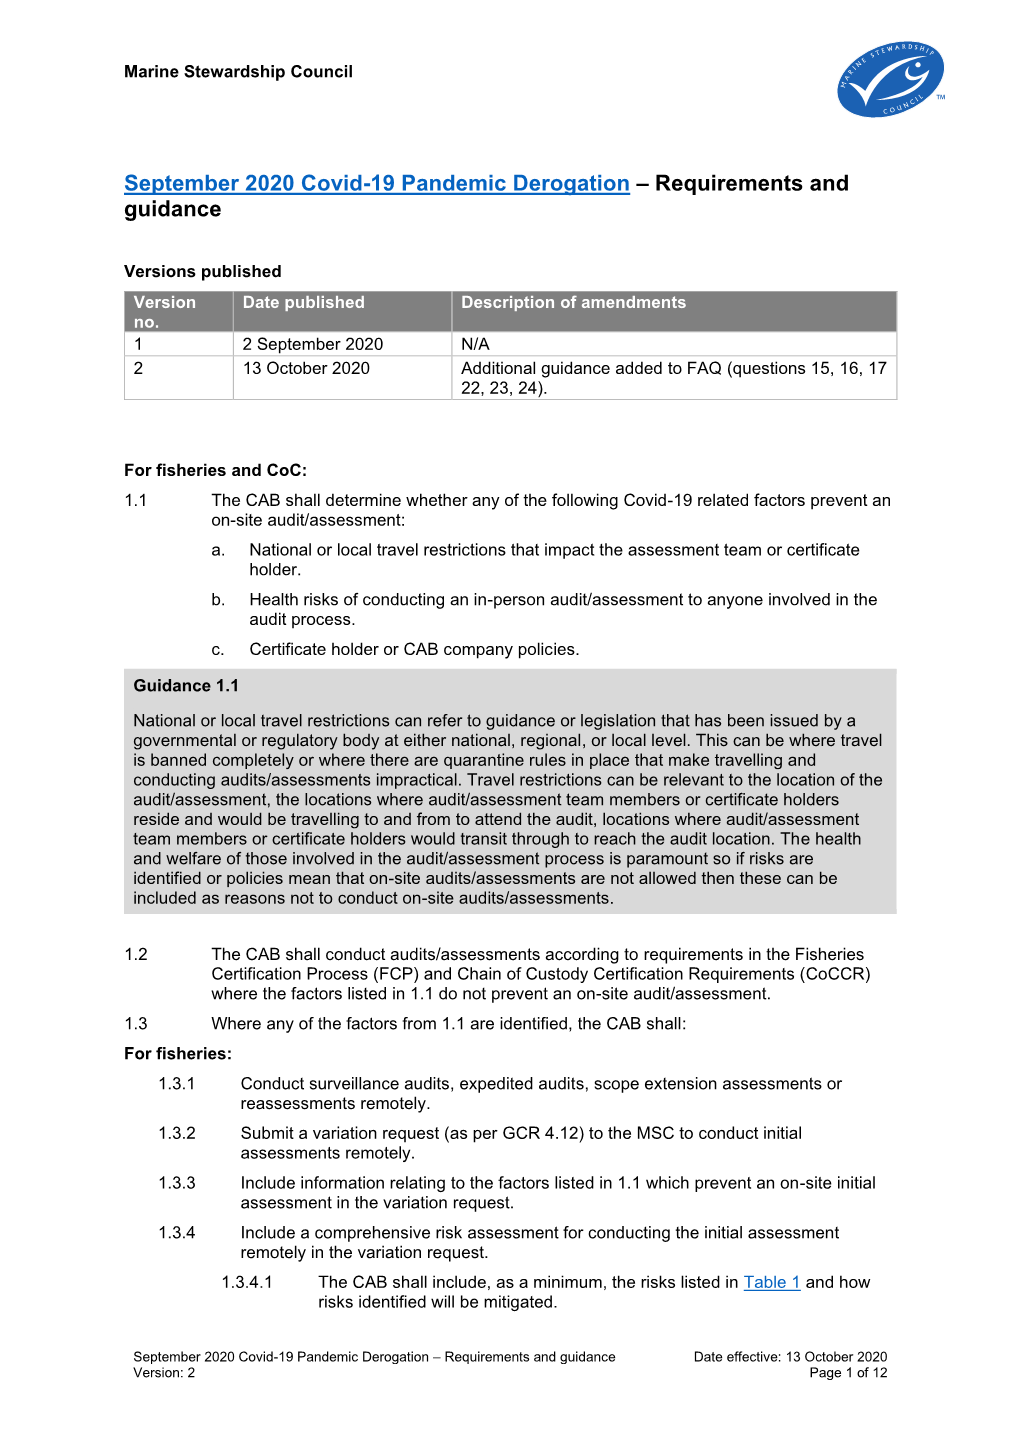 September 2020 Covid-19 Pandemic Derogation – Requirements and Guidance